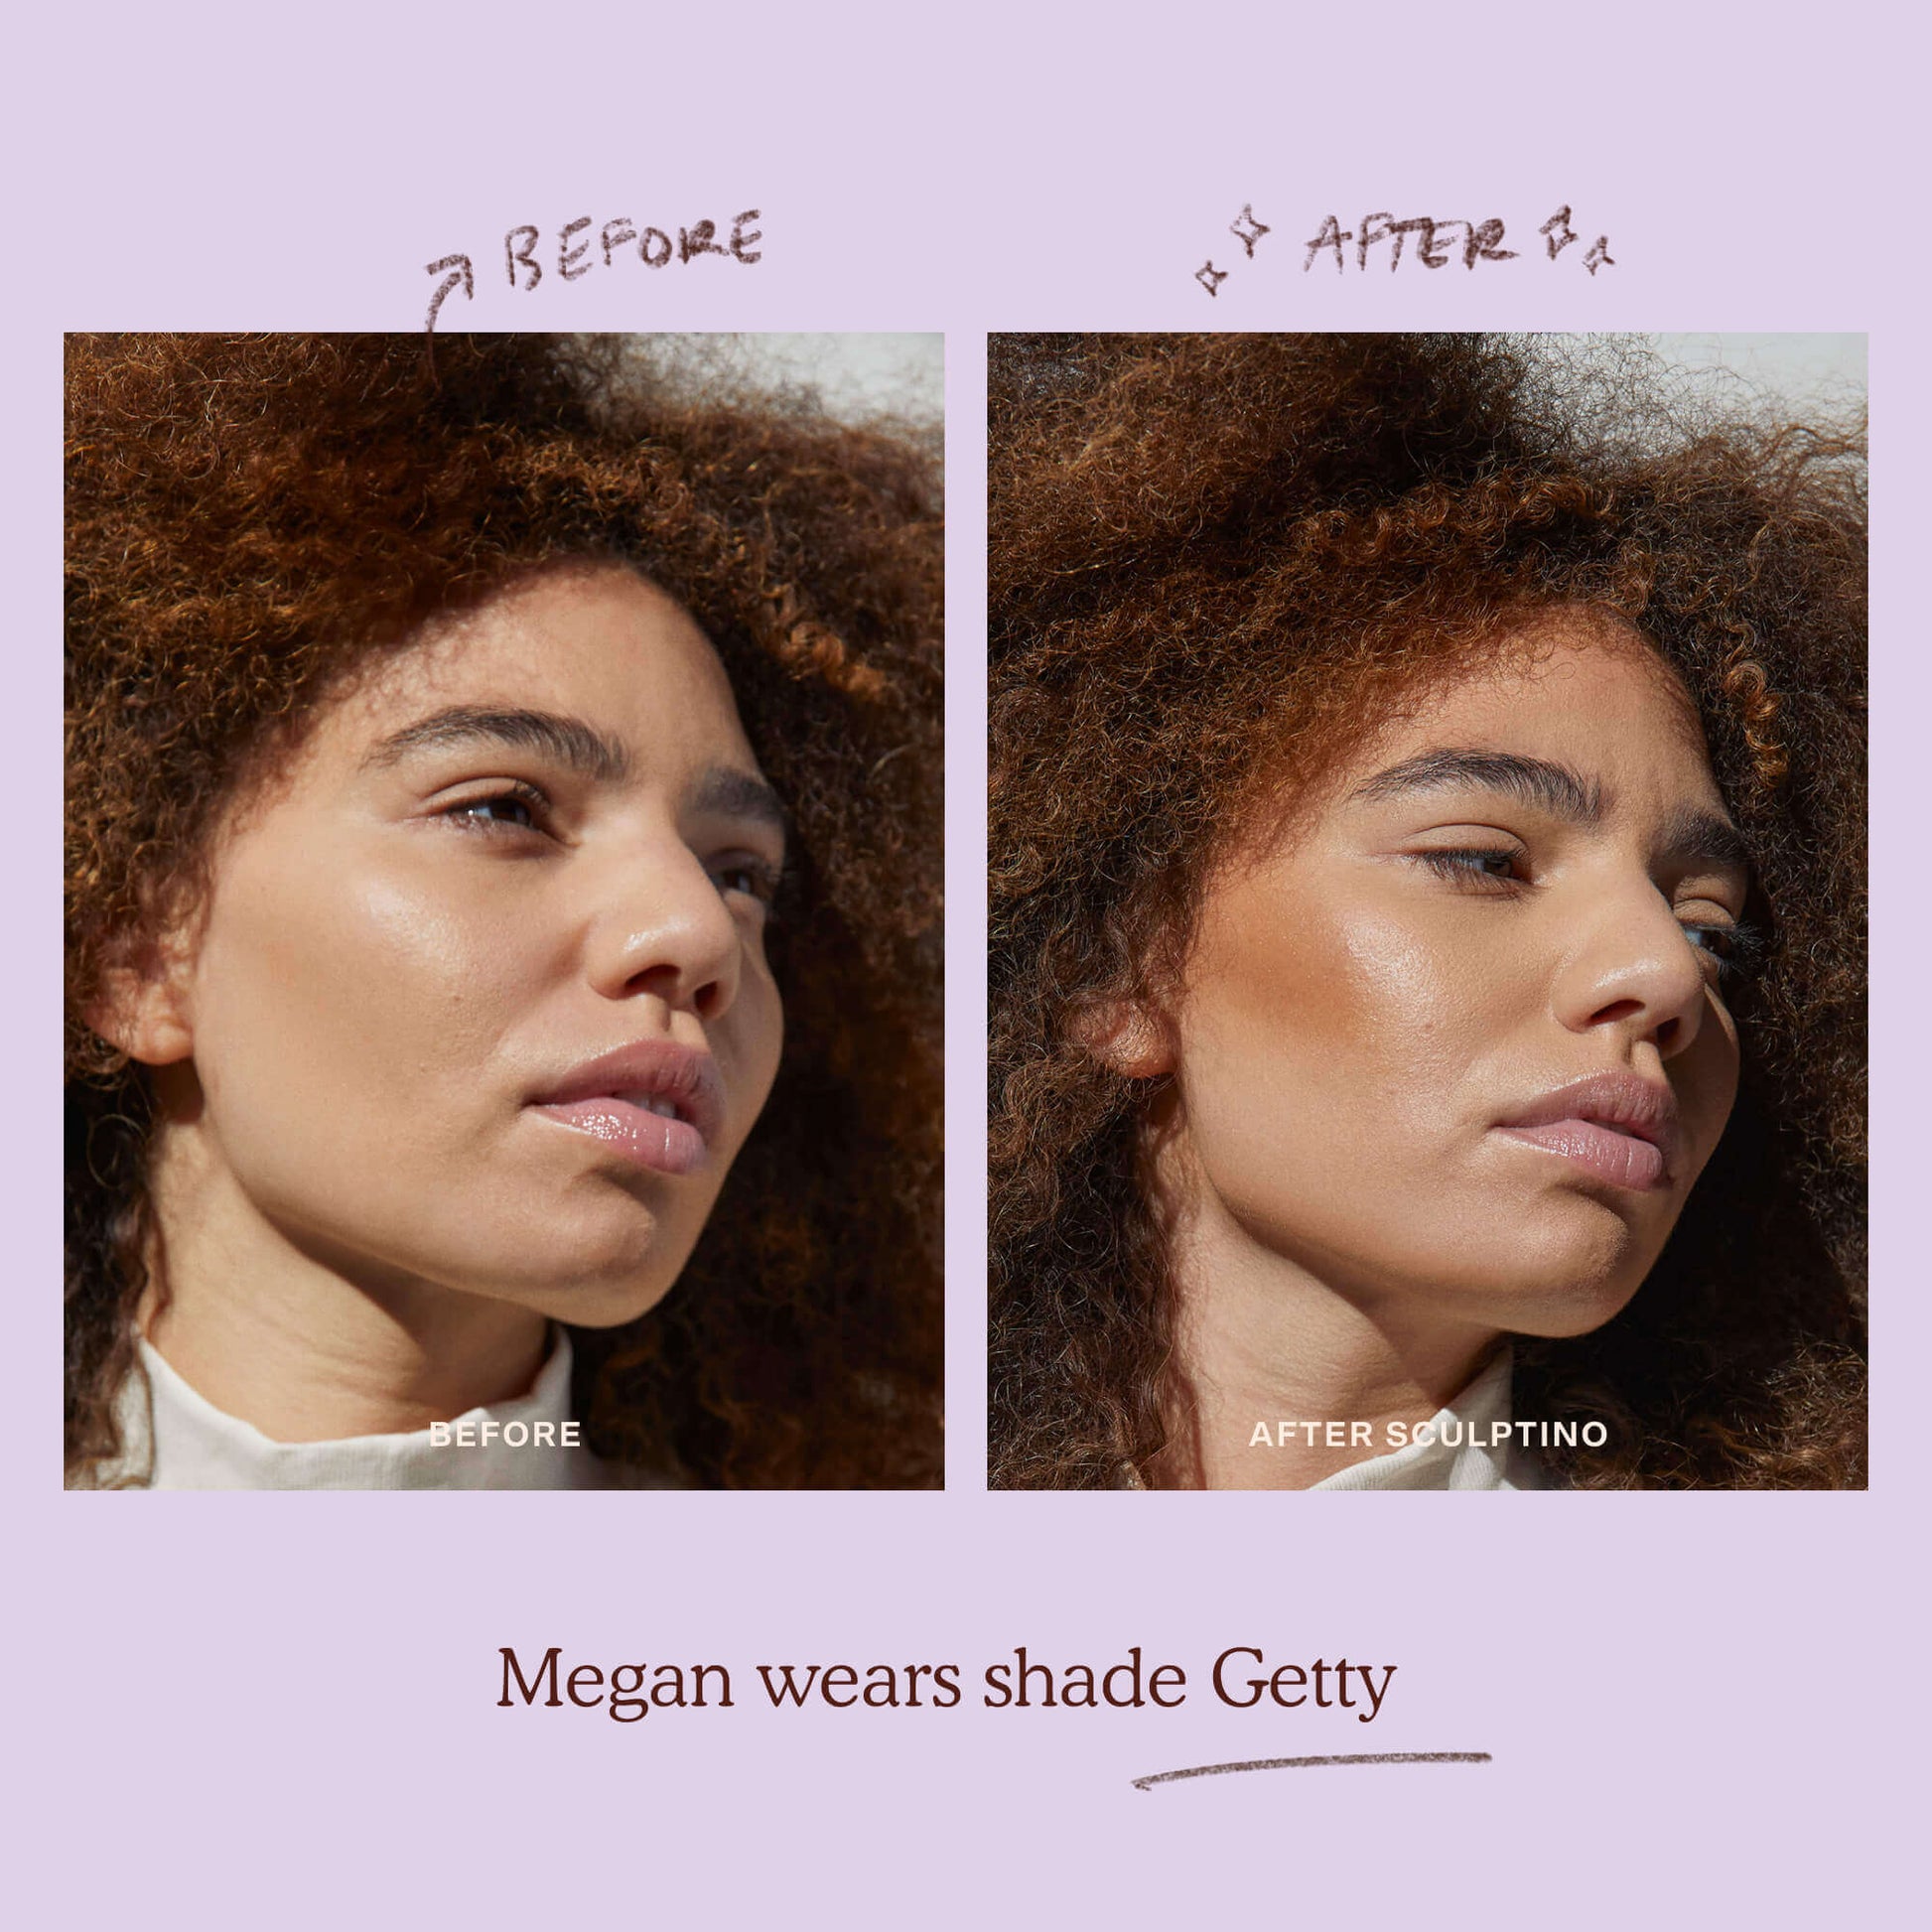 A model before and after applying the Tower 28 Beauty Sculptino™ Cream Contour in the shade Getty